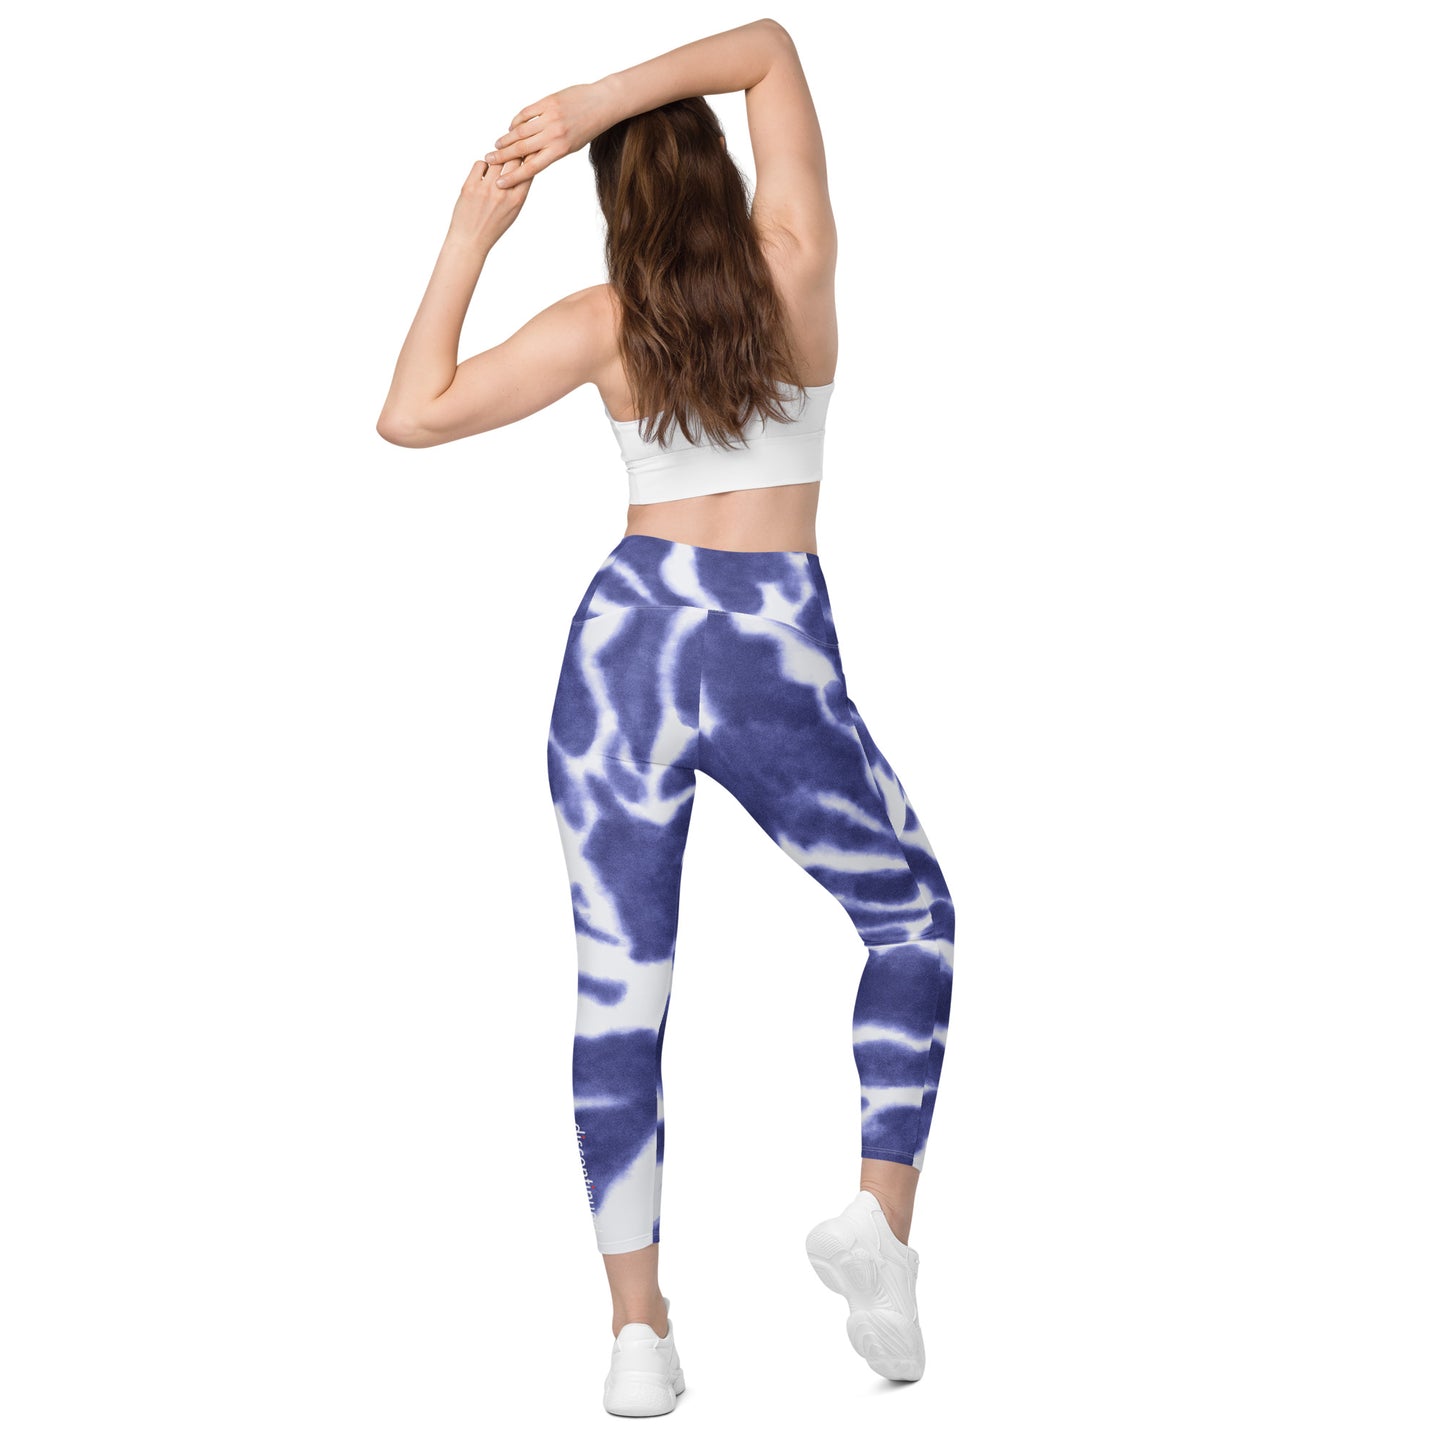 2Bdiscontinued. women's leggings with pockets